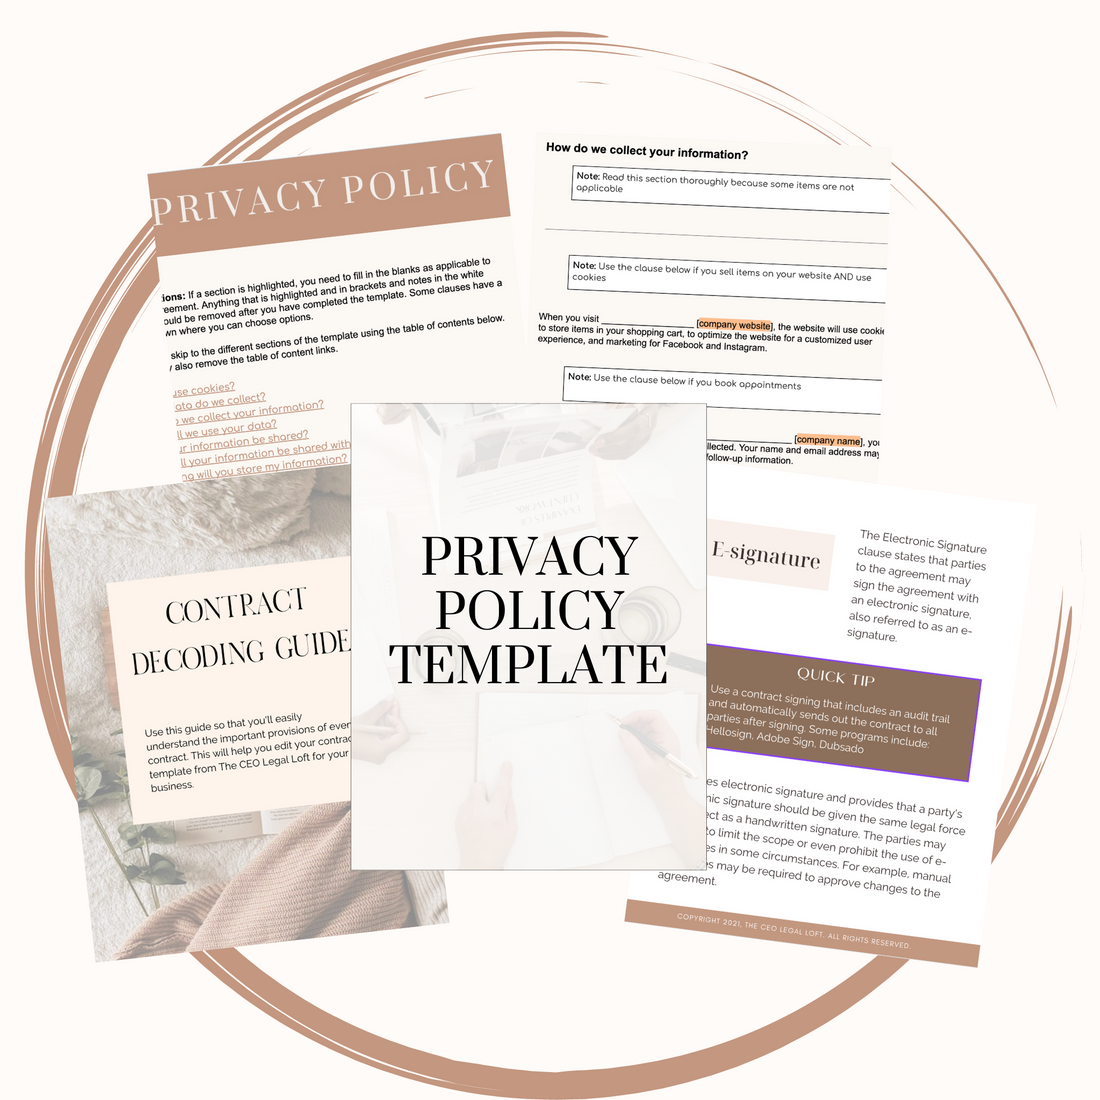 Privacy Policy &amp; Website Terms and Conditions Bundle for Small Business